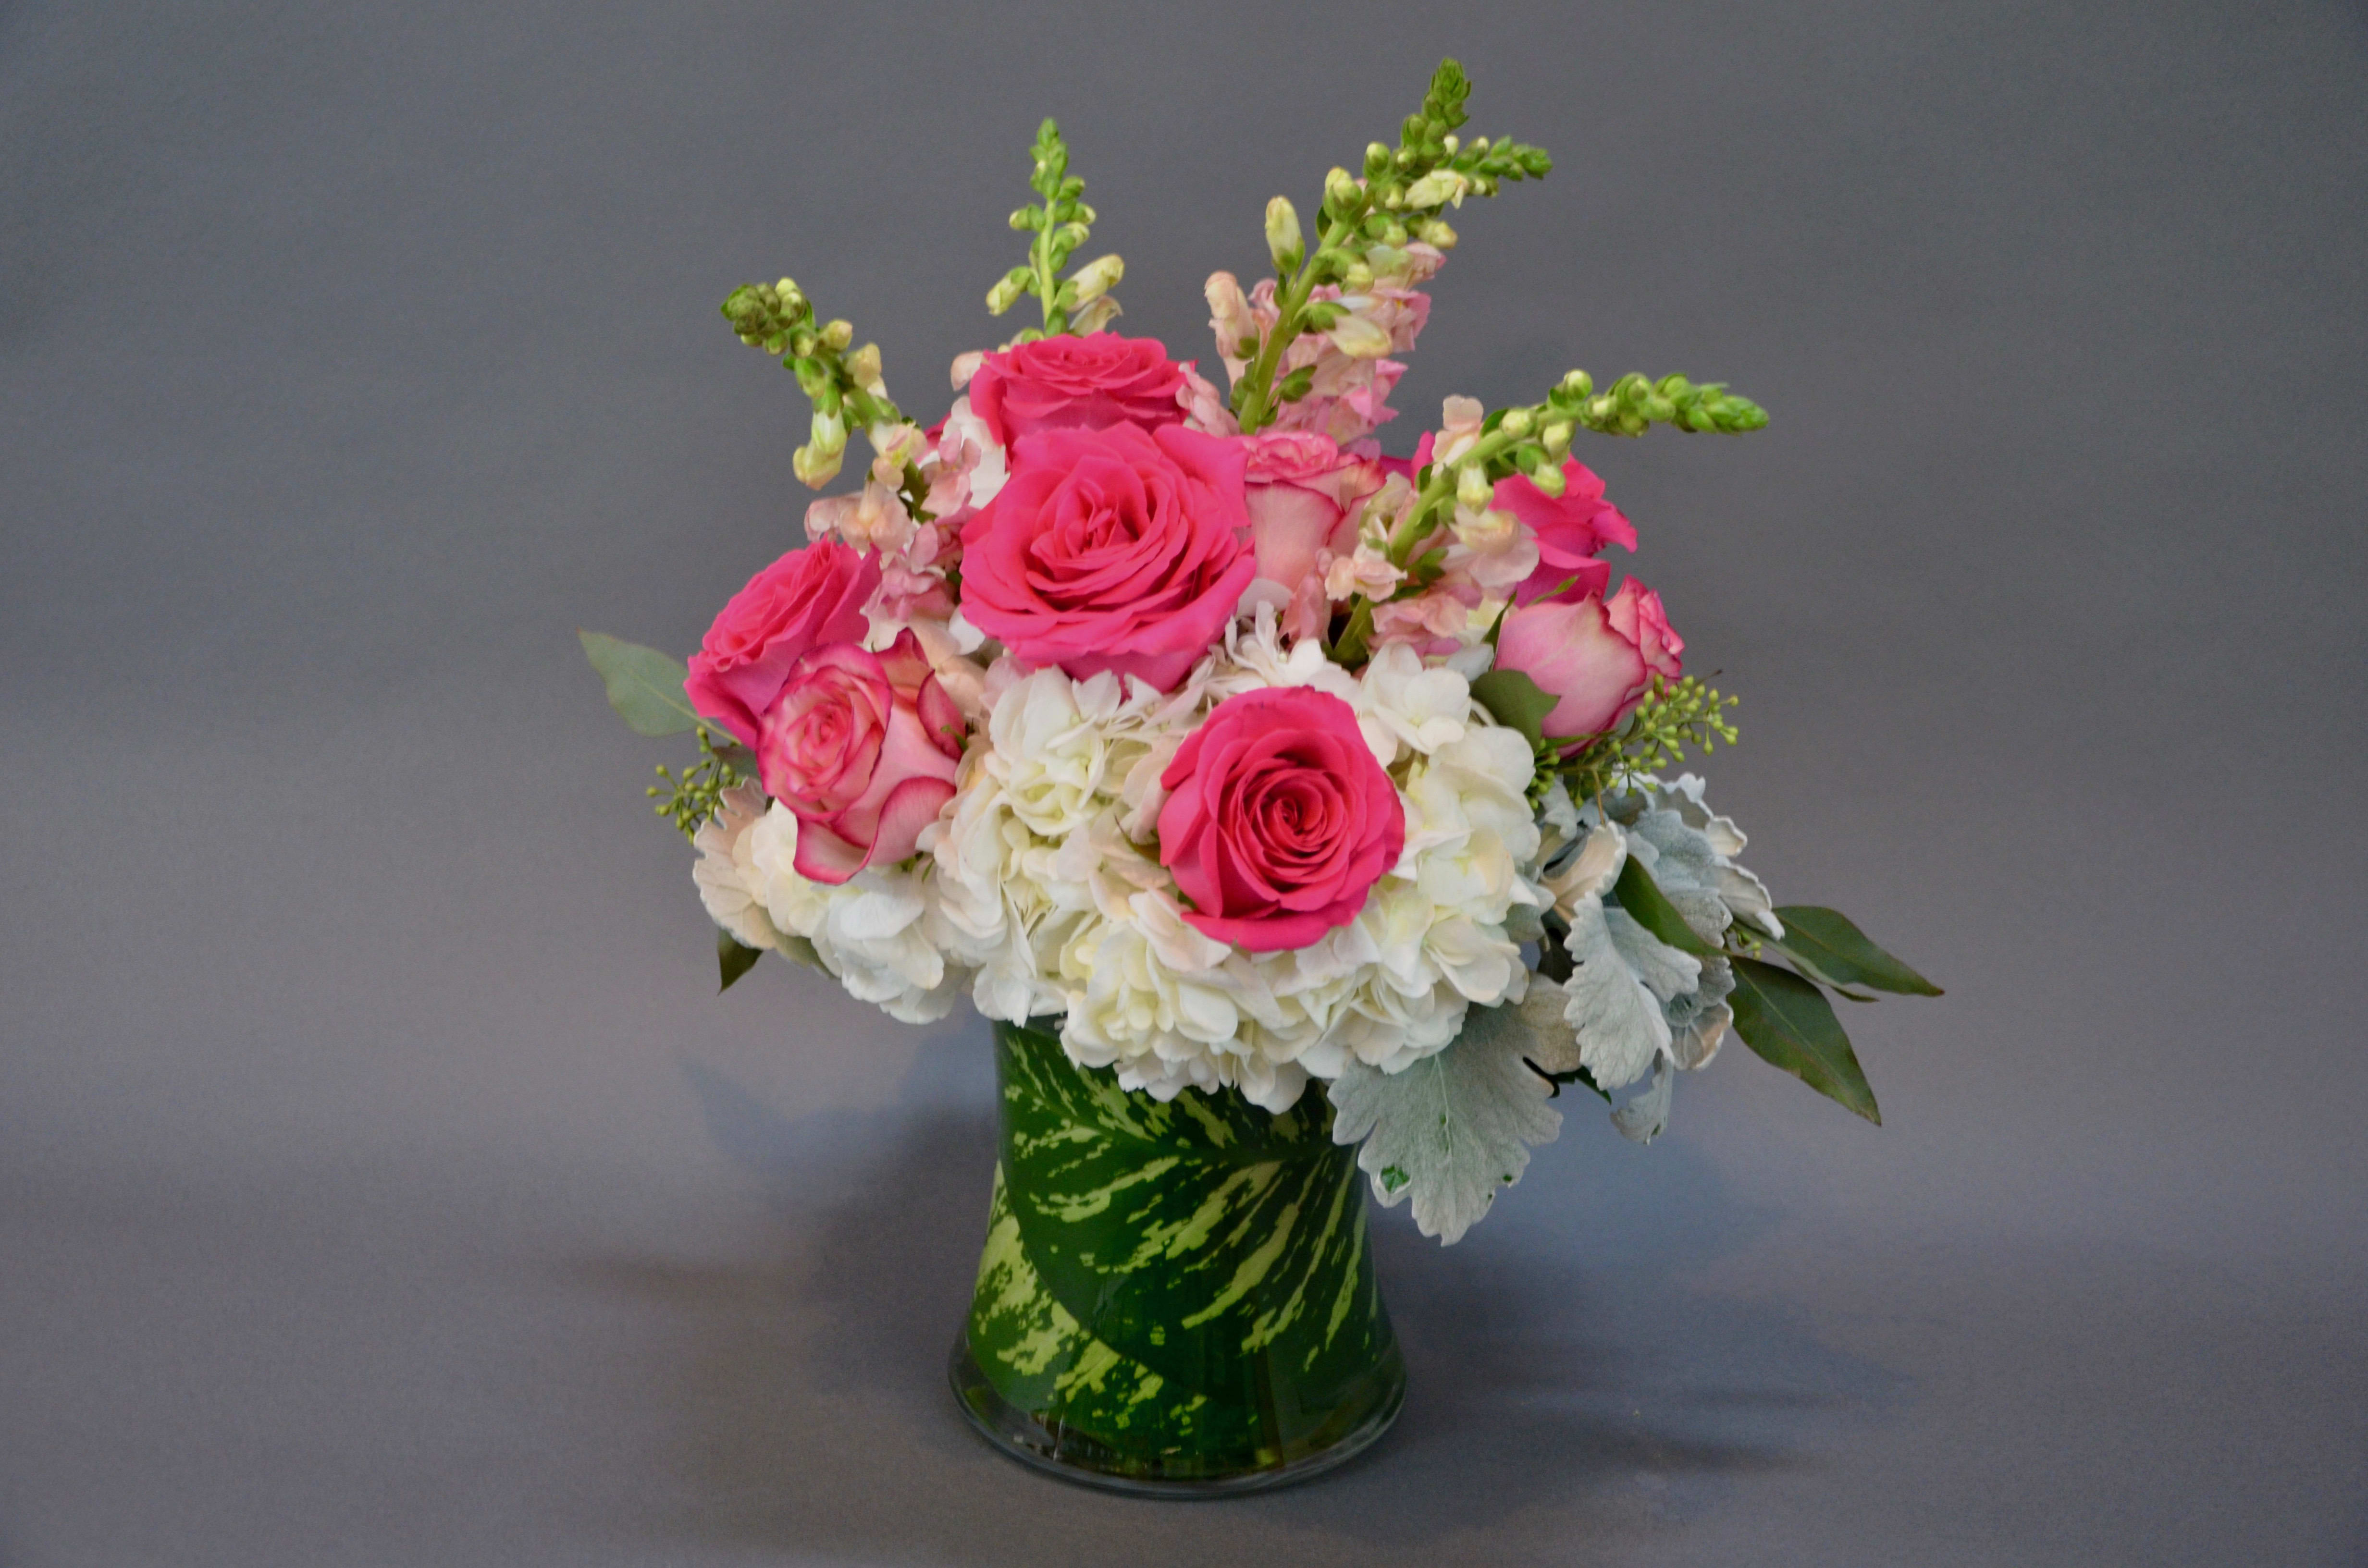 Pretty in Pink - Pink roses and snapdragons surrounded by white hydrangea- for the person that loves pink!